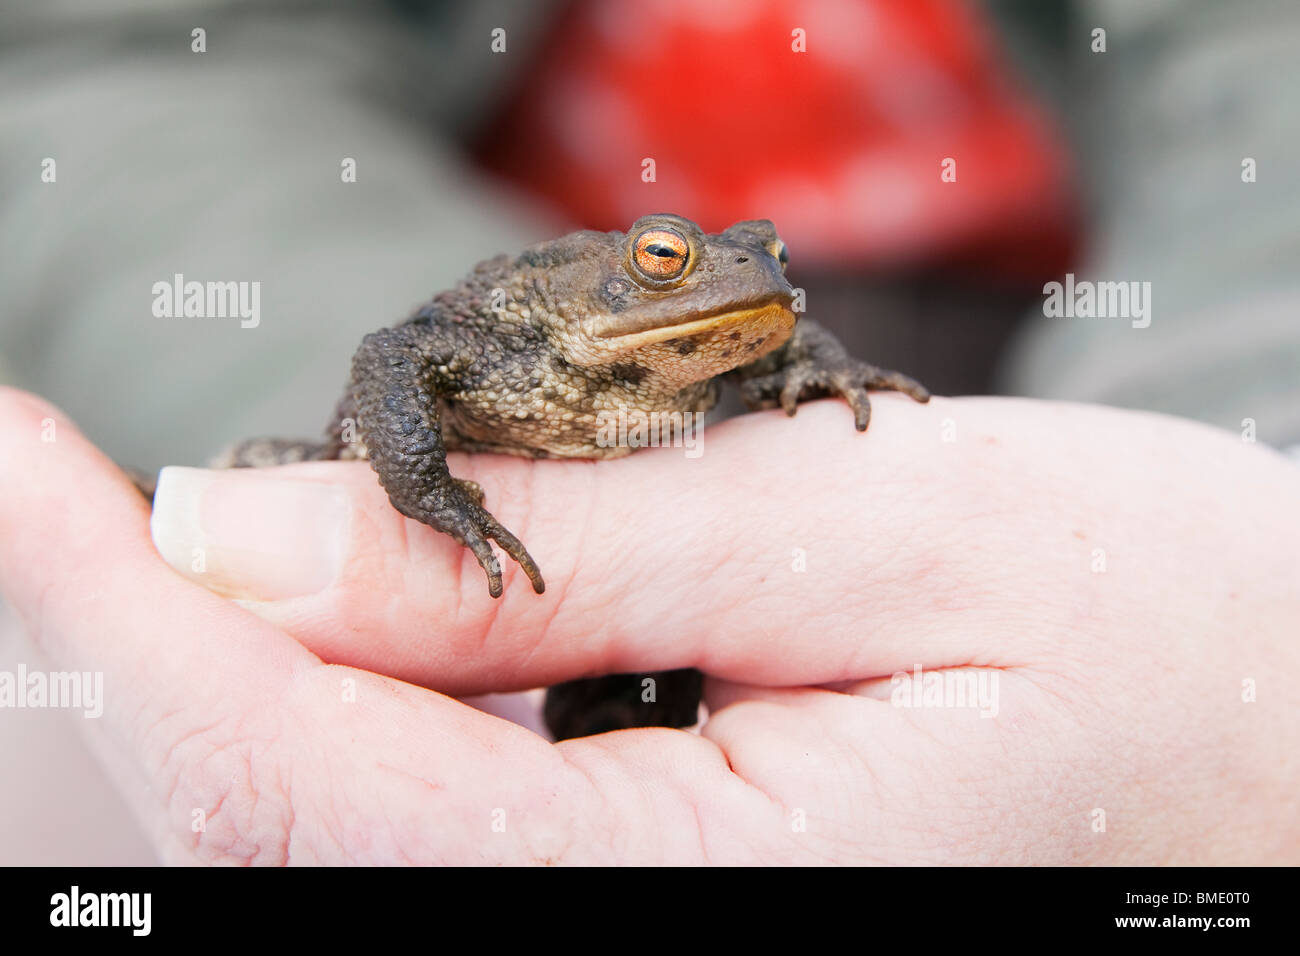 A common toad (bufo bufo) being held in a persons hand Stock Photo